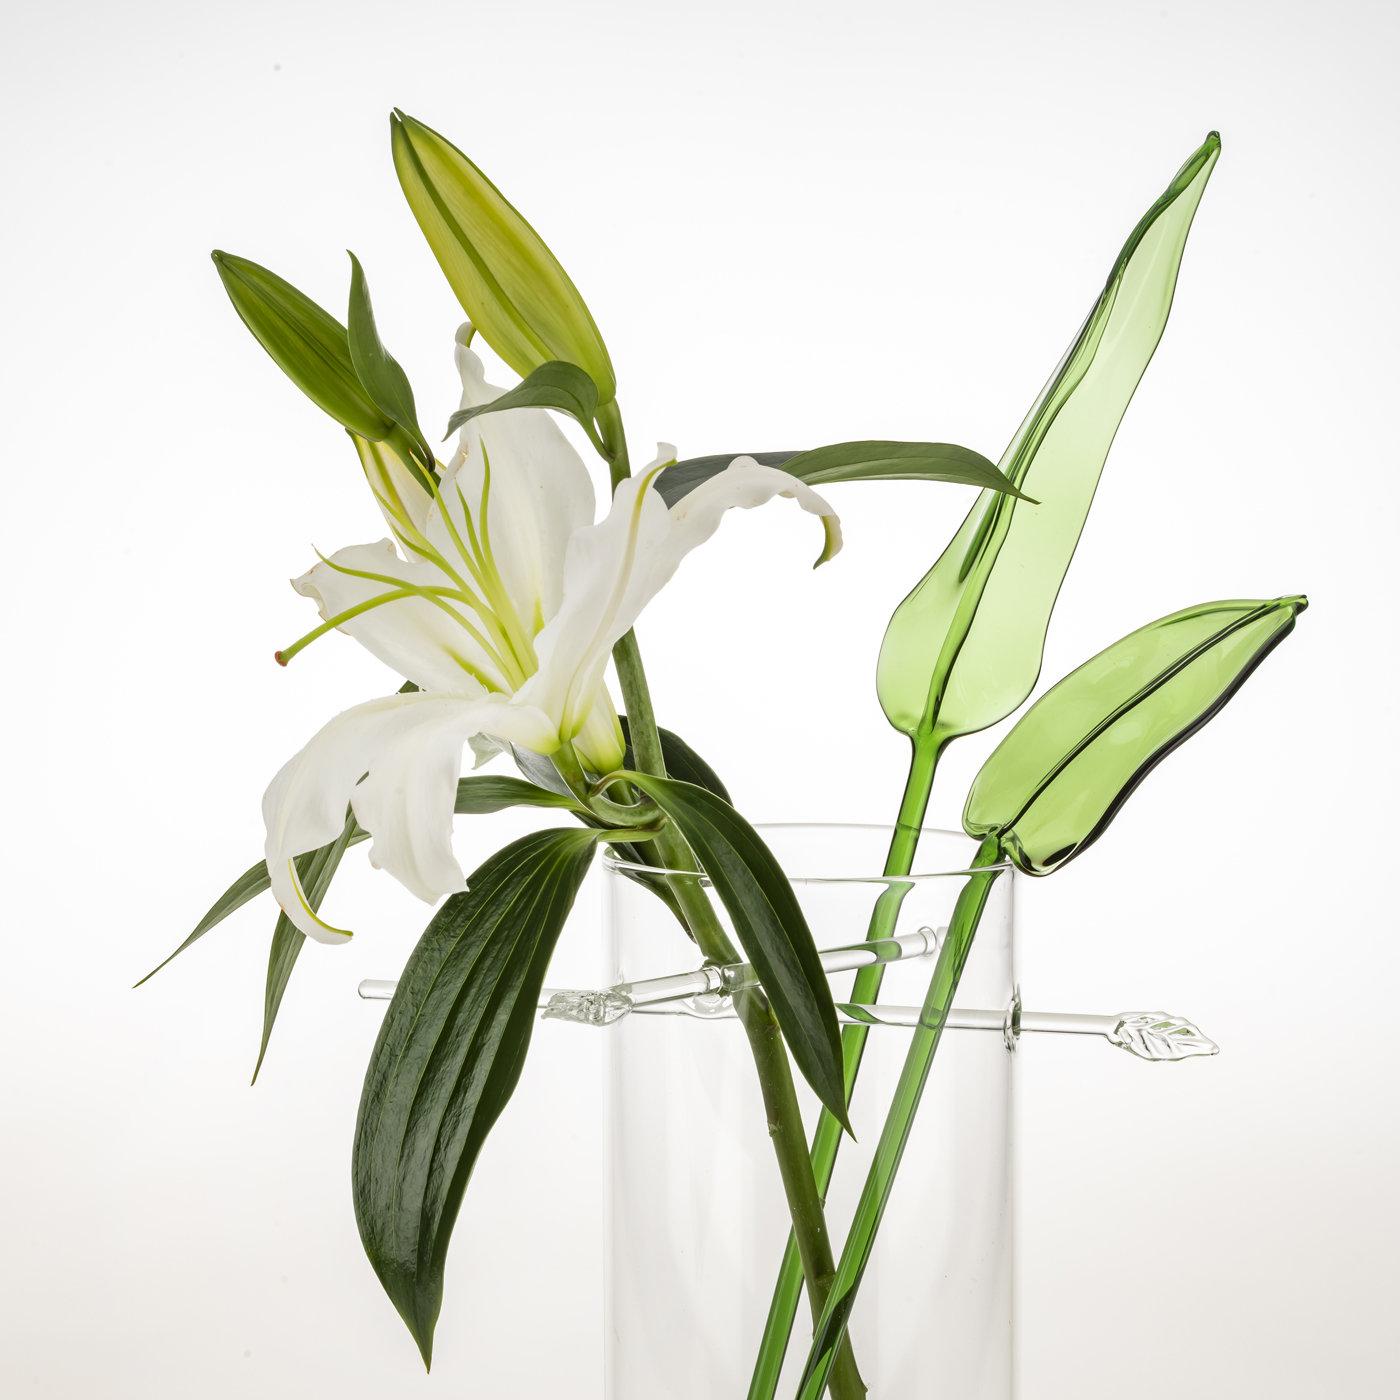 Taking inspiration from the traditional Japanese women's hairstyle, this vase is an exquisite example of modern aesthetic and traditional craftsmanship and a captivating statement in a modern living room or entryway decor. Fashioned of clear